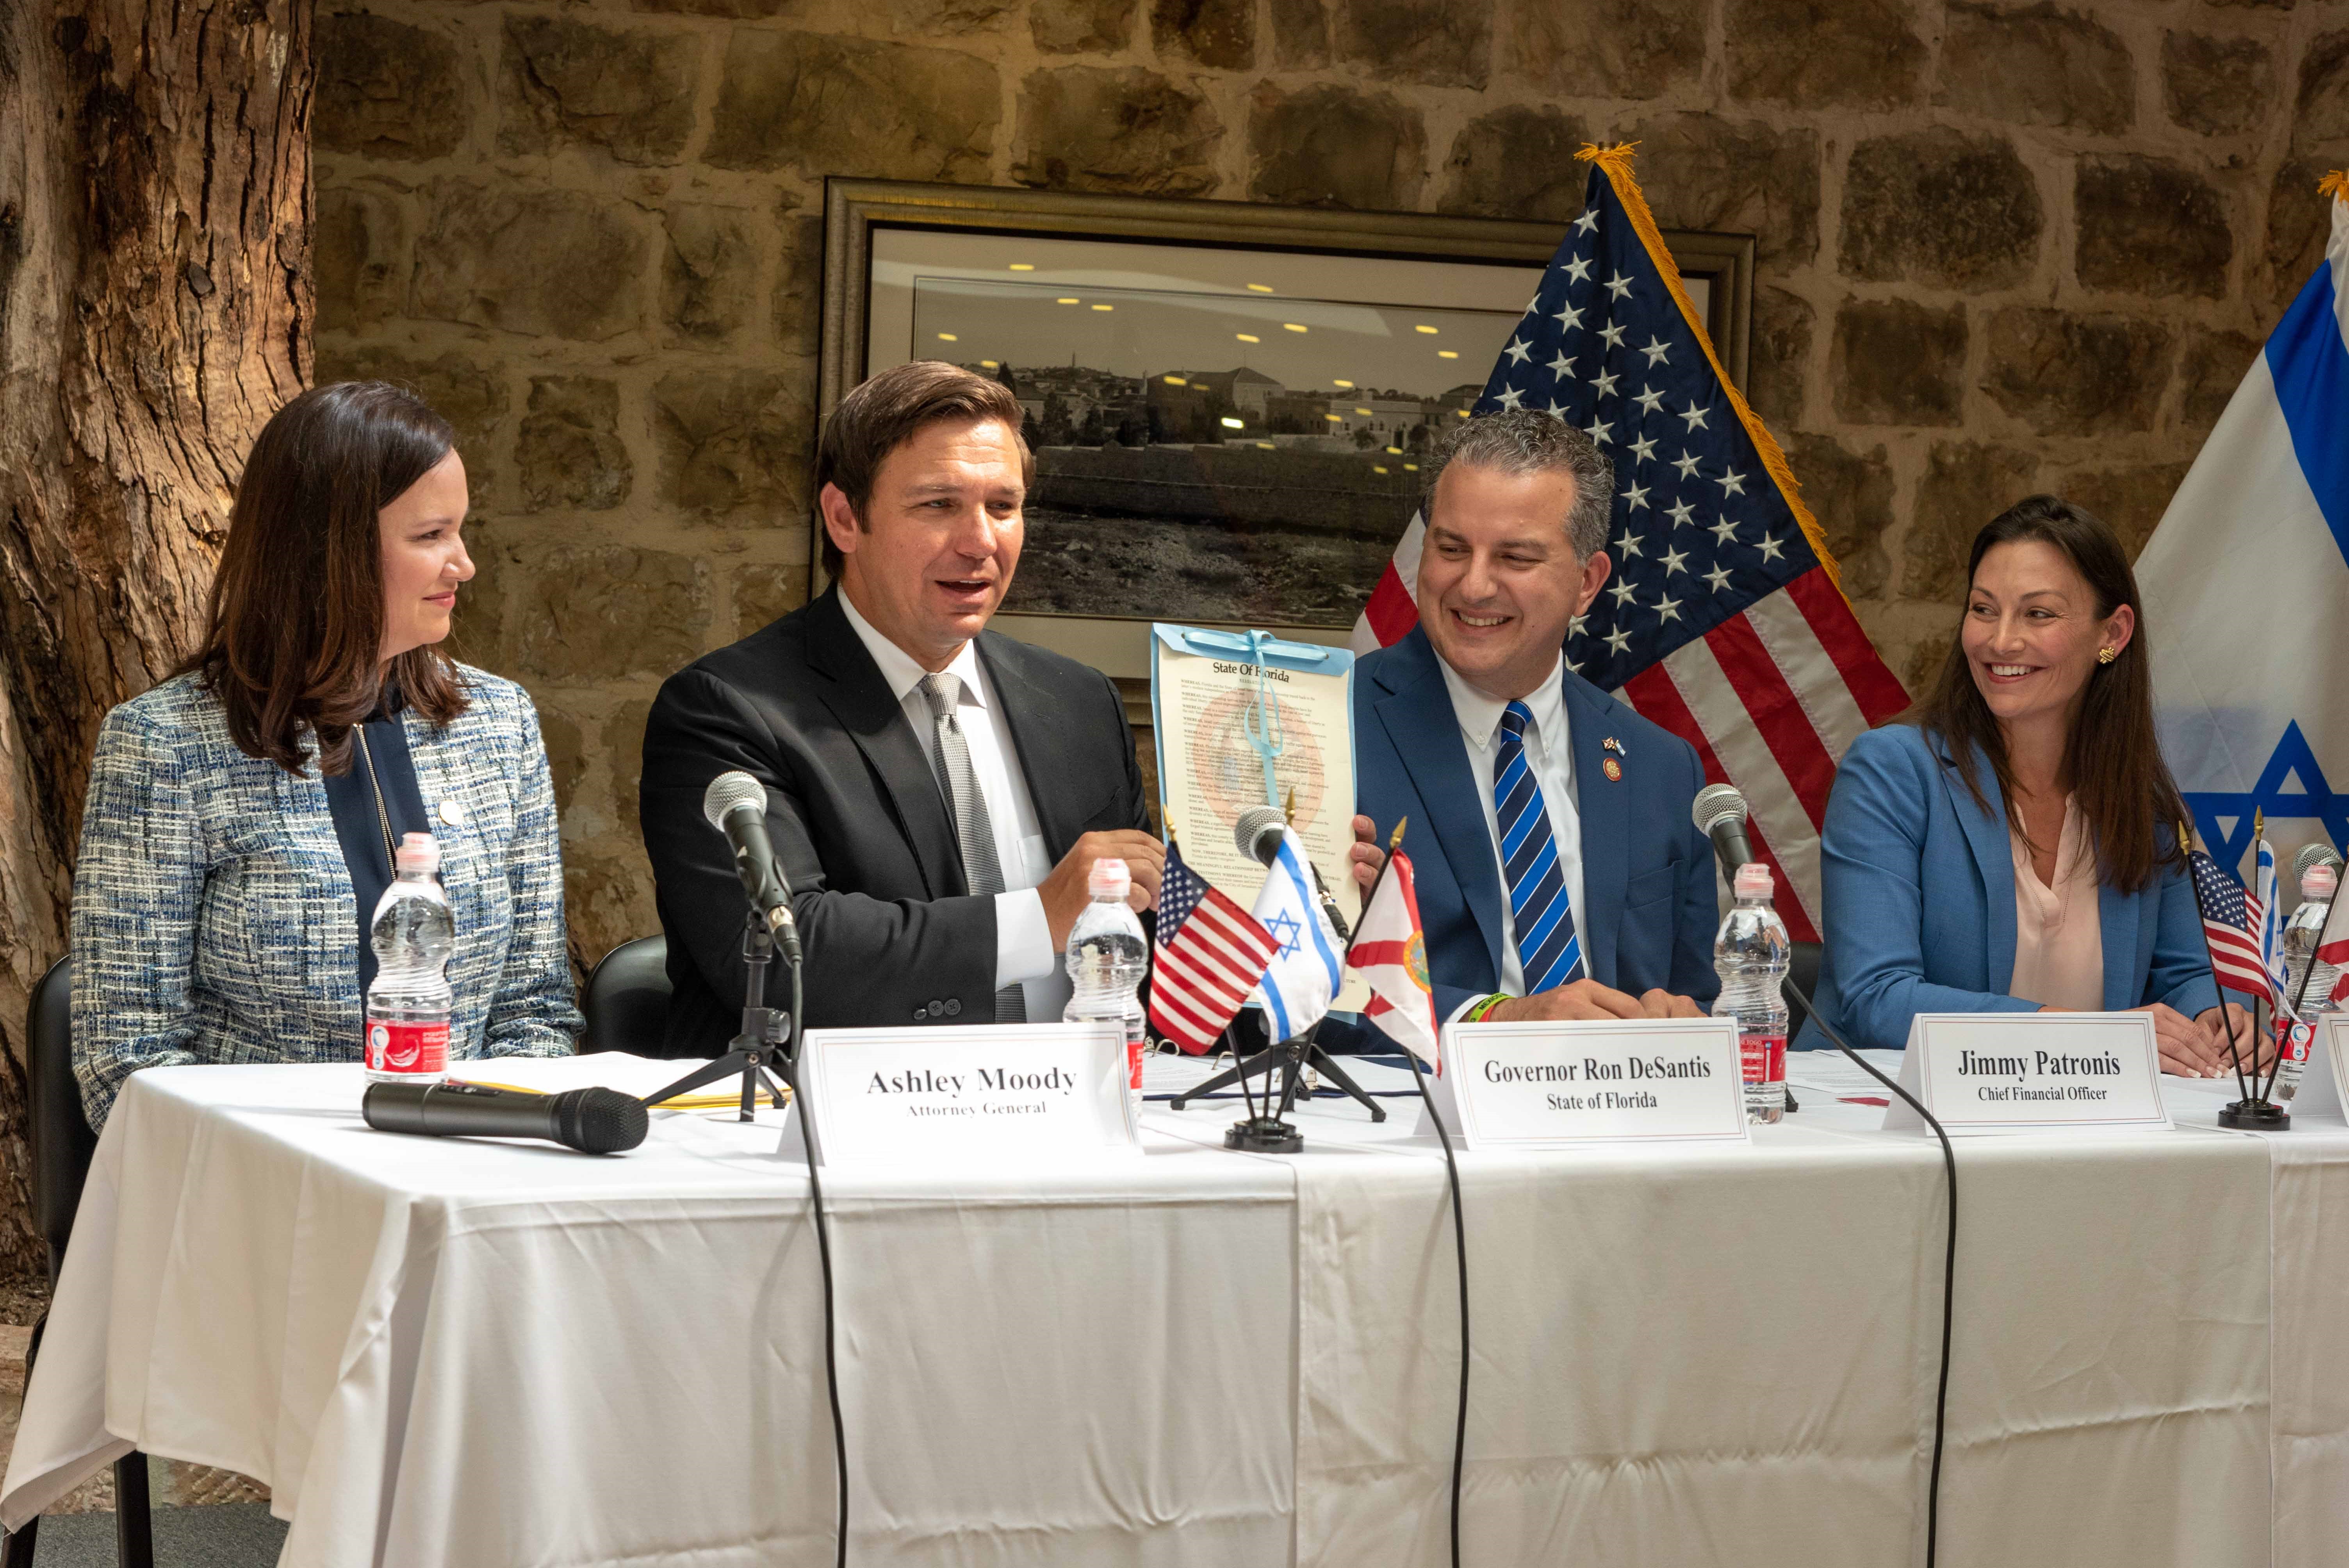   Governor Ron DeSantis Leads Historic Ceremonial Meeting with Florida Cabinet Members at the U.S. Embassy in Jerusalem